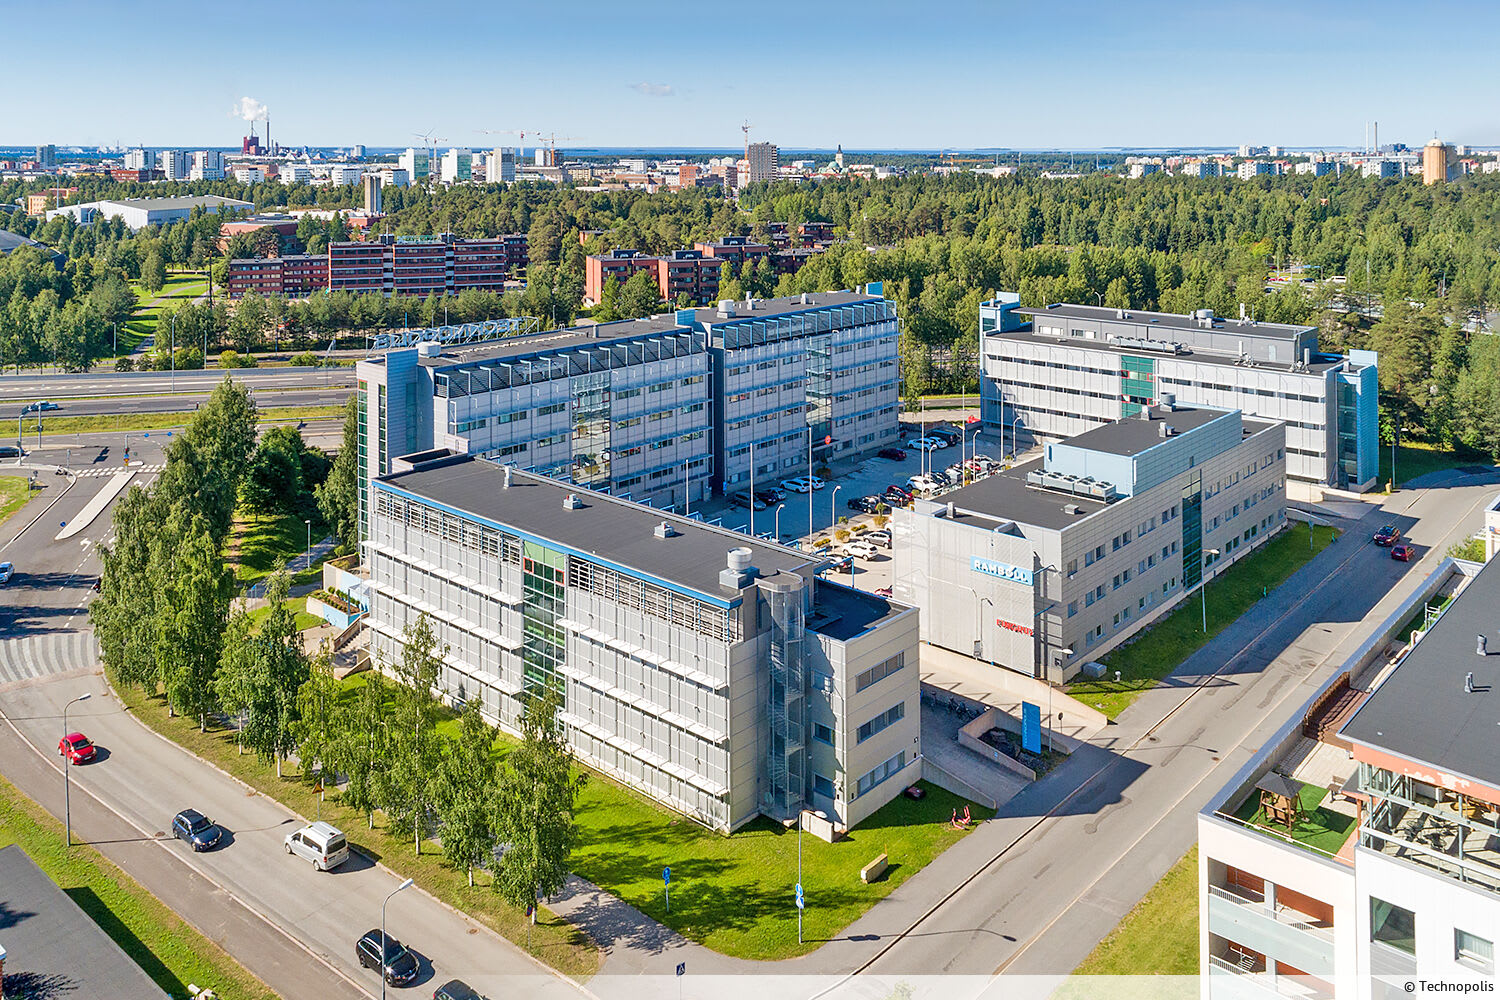 A modern office space on the first floor, which in its current form consists of an open space, is available for lease at the Technopolis Kontinkangas campus. The property offers excellent services to its tenants.